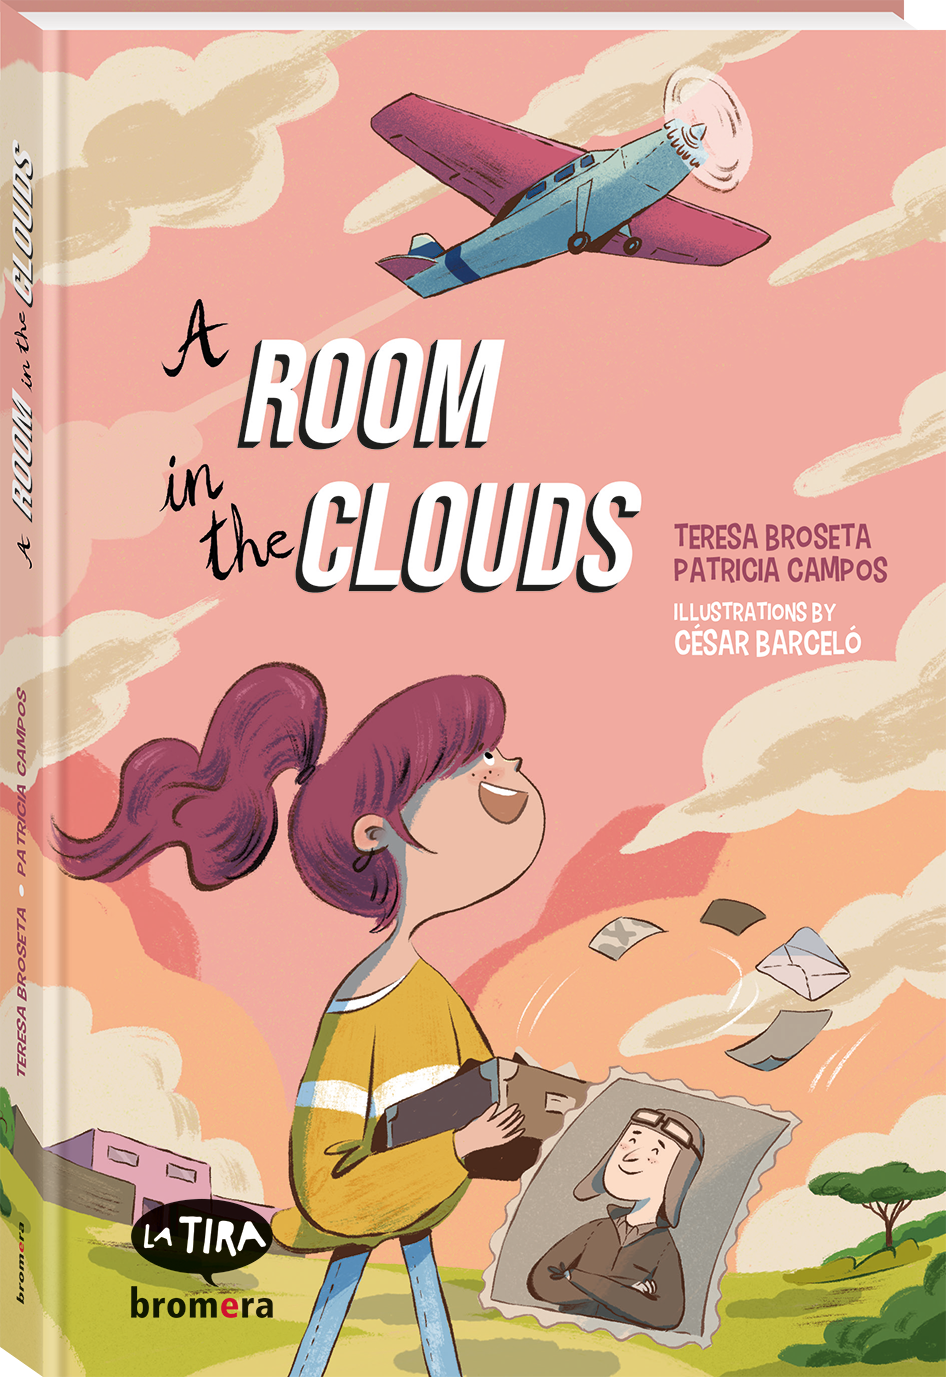 A room in the clouds